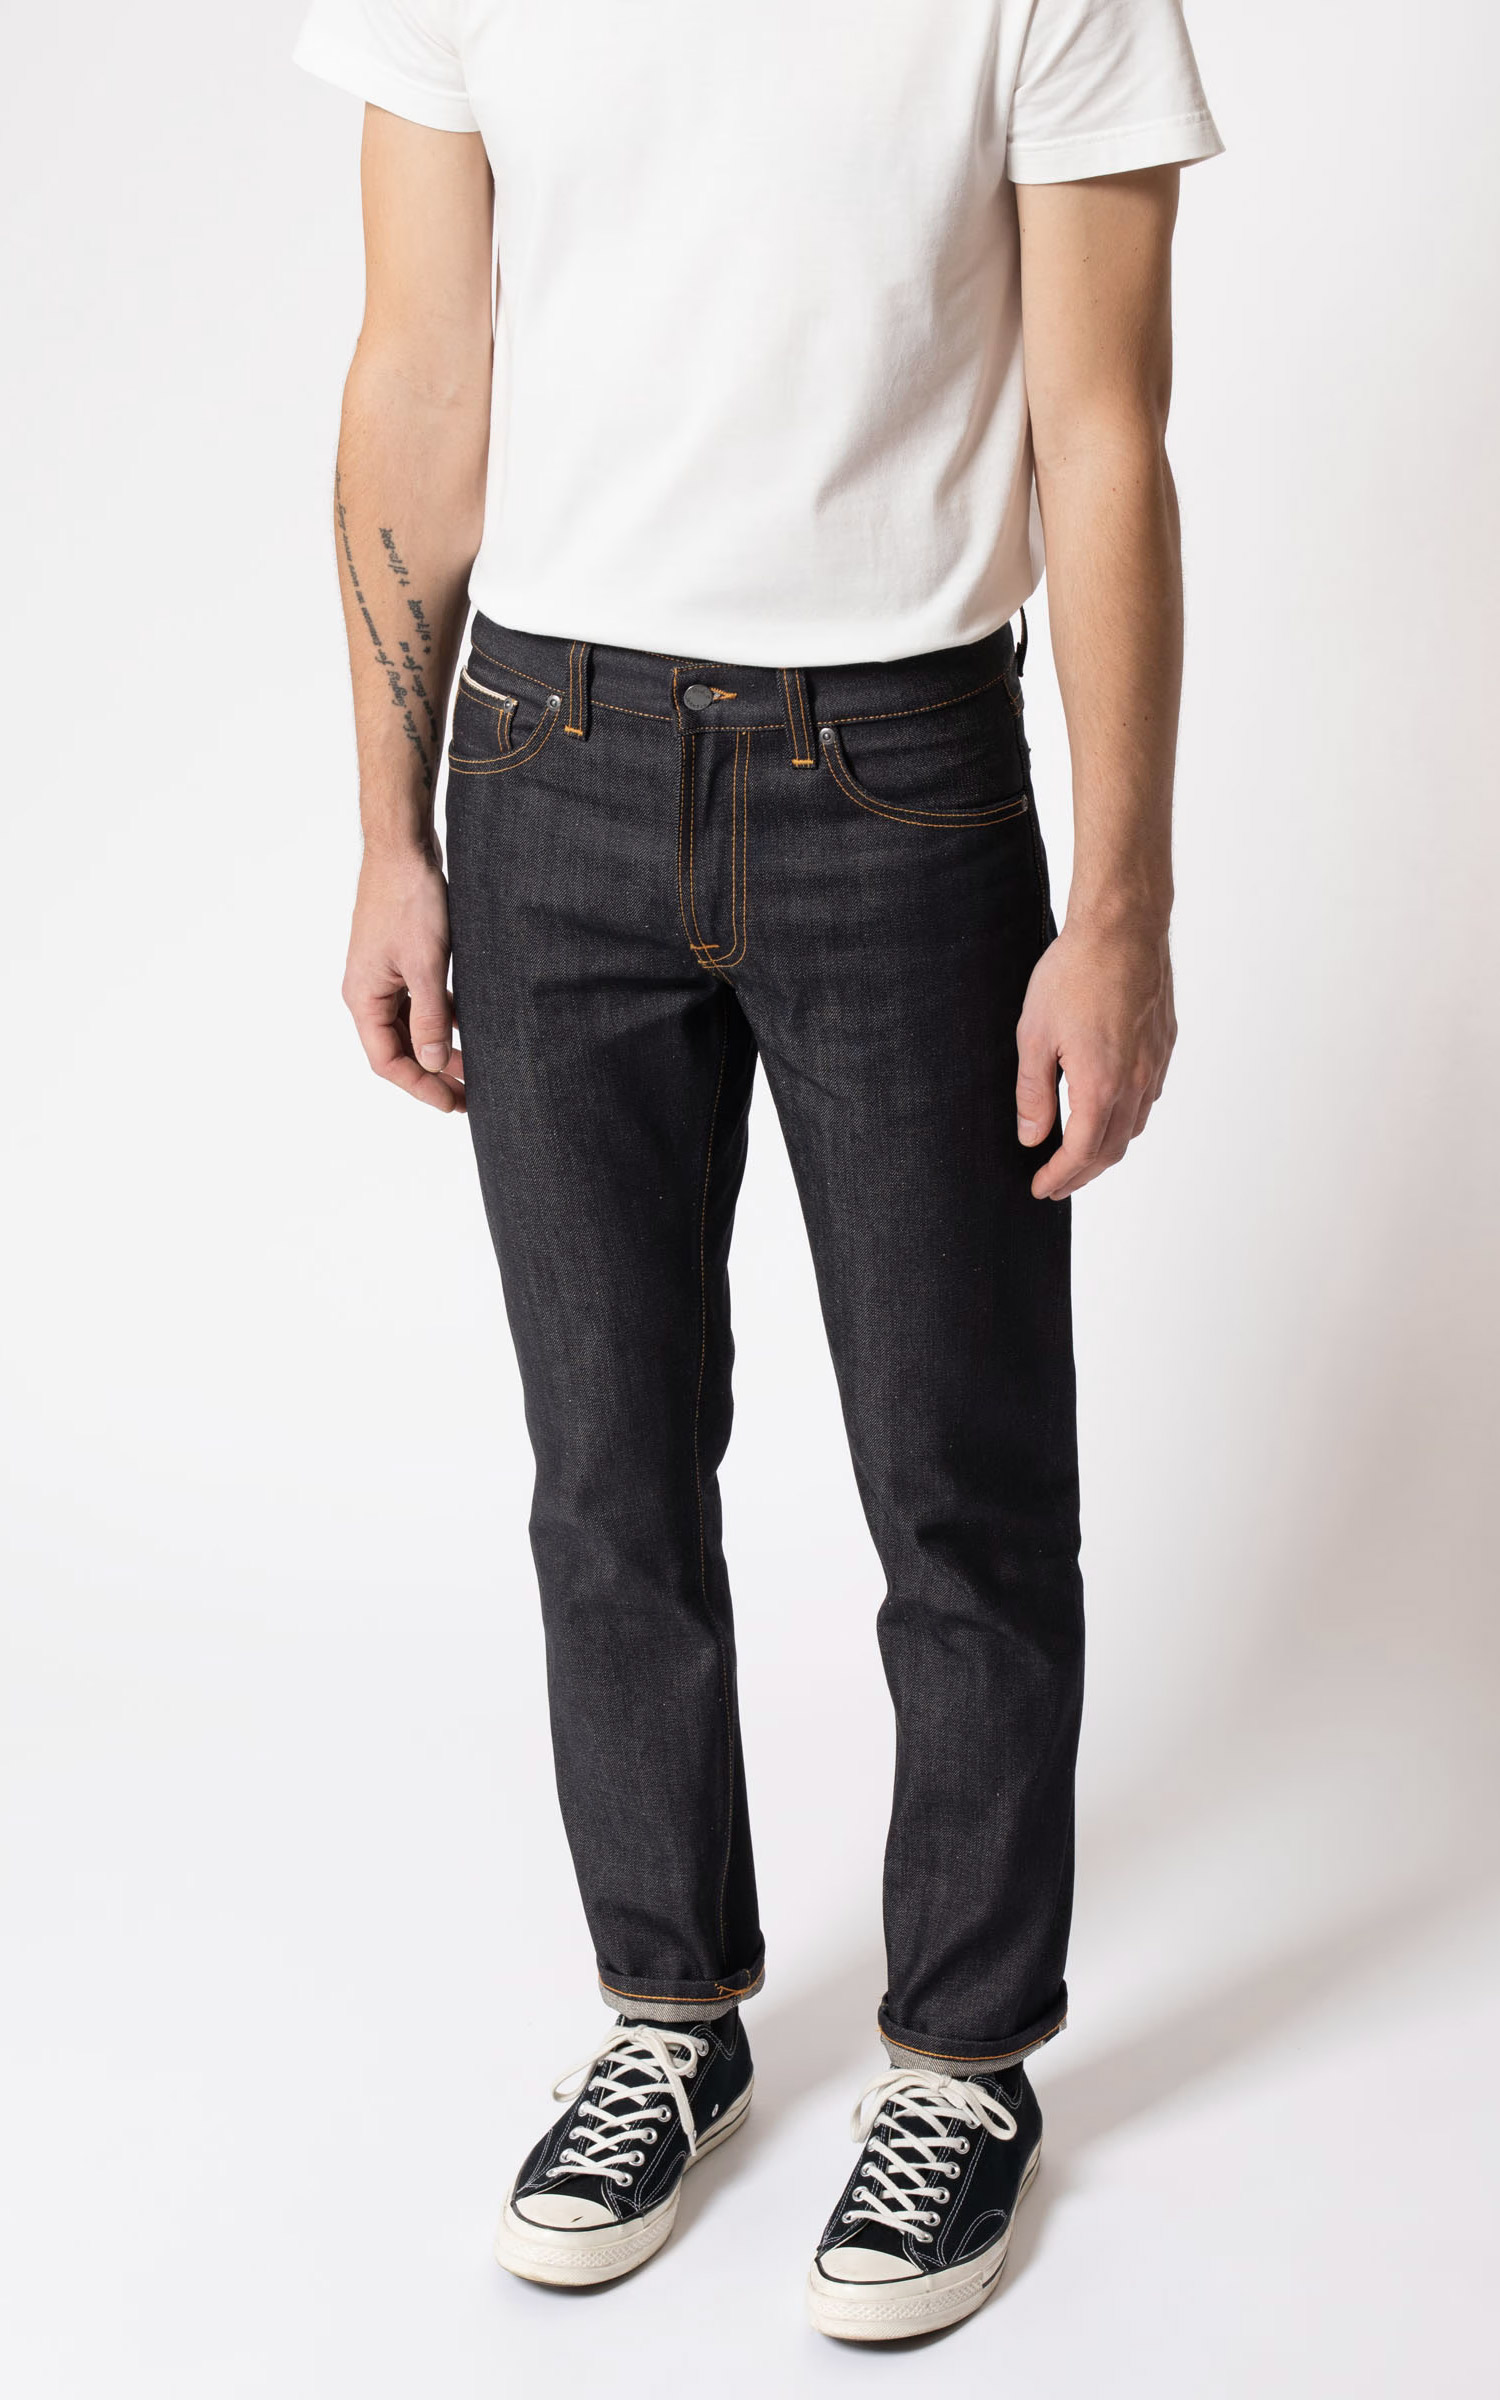 Nudie Jeans Gritty Jackson Dry Selvage | Cultizm